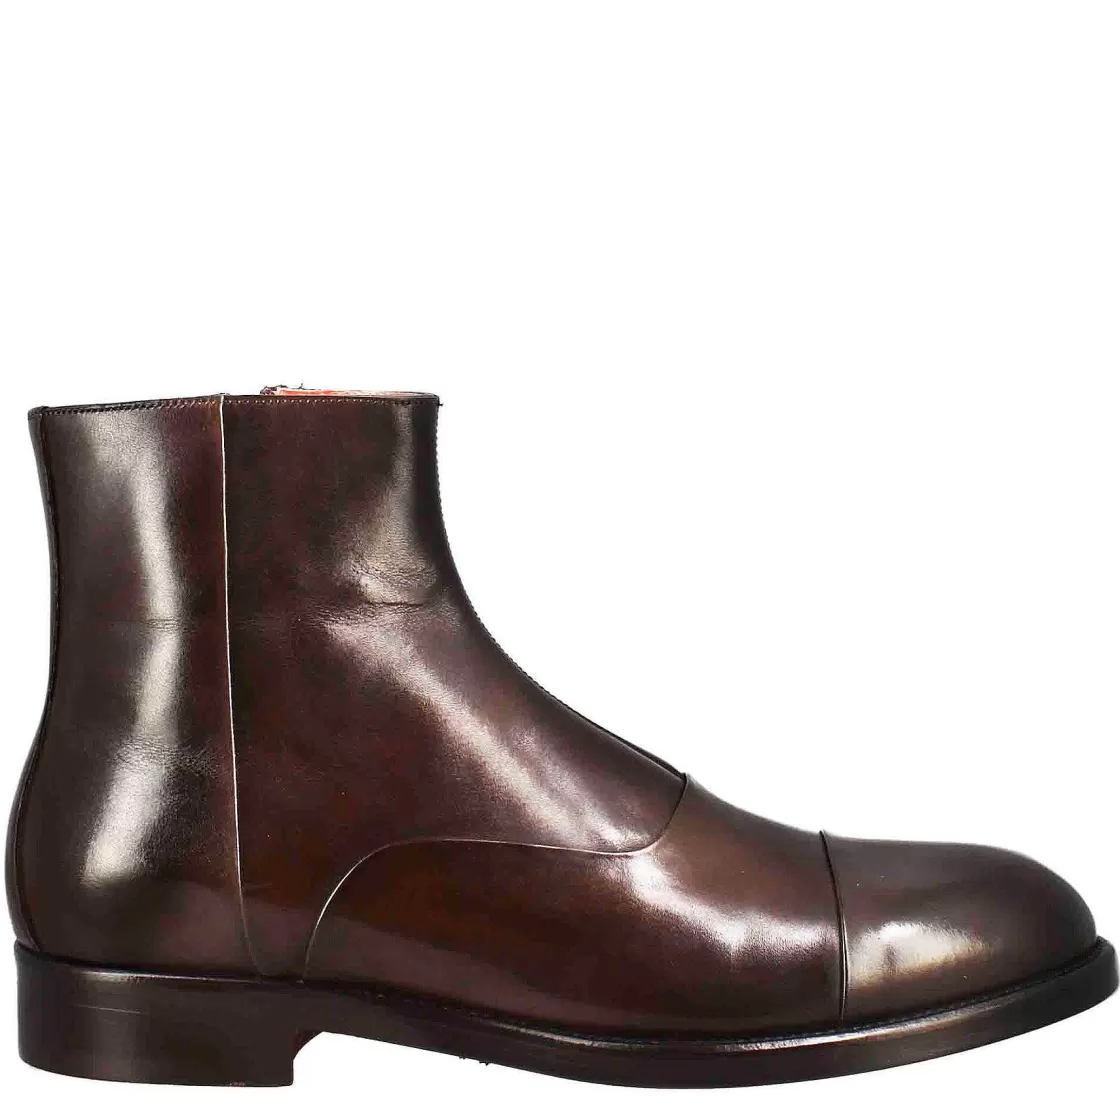 Leonardo High Men'S Ankle Boot In Chocolate-Colored Leather With Zip Closure Online